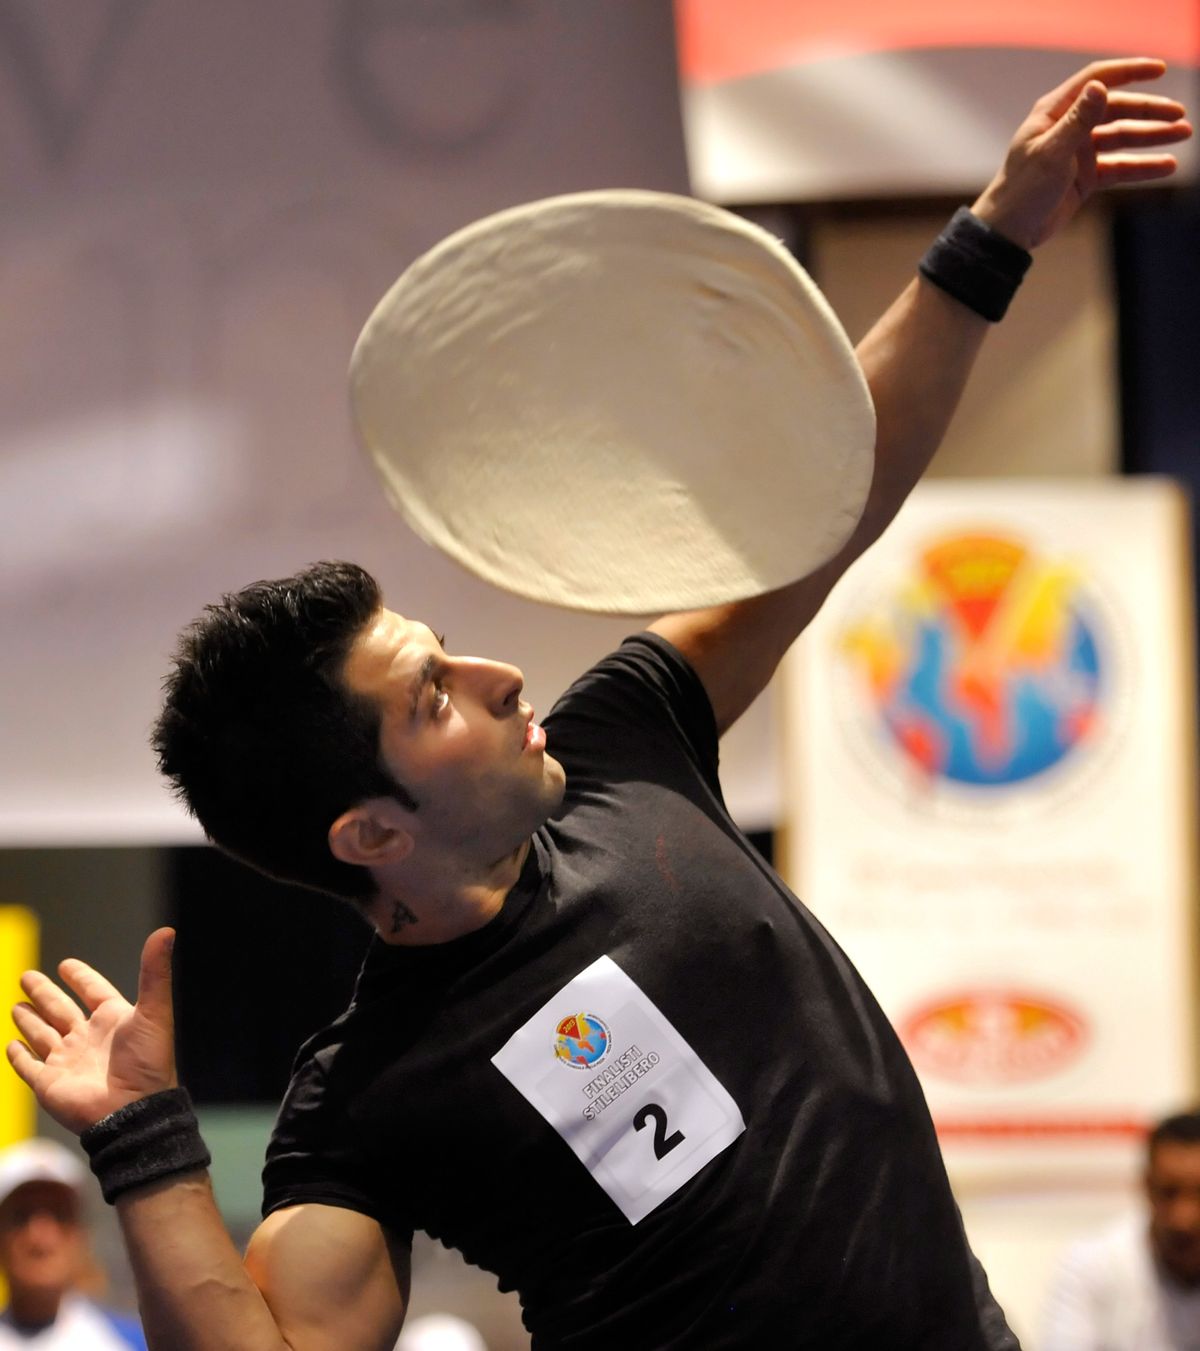 Italy’s Alessandro Colluccino performs with dough during an acrobatic pizza event, part of the Pizza World Championships in Parma, Italy, on April 17, 2013. The acrobatics of pizza dough throwing are optional for beginner cooks, but learning how dough feels is a basic cooking skill.  (Associated Press)